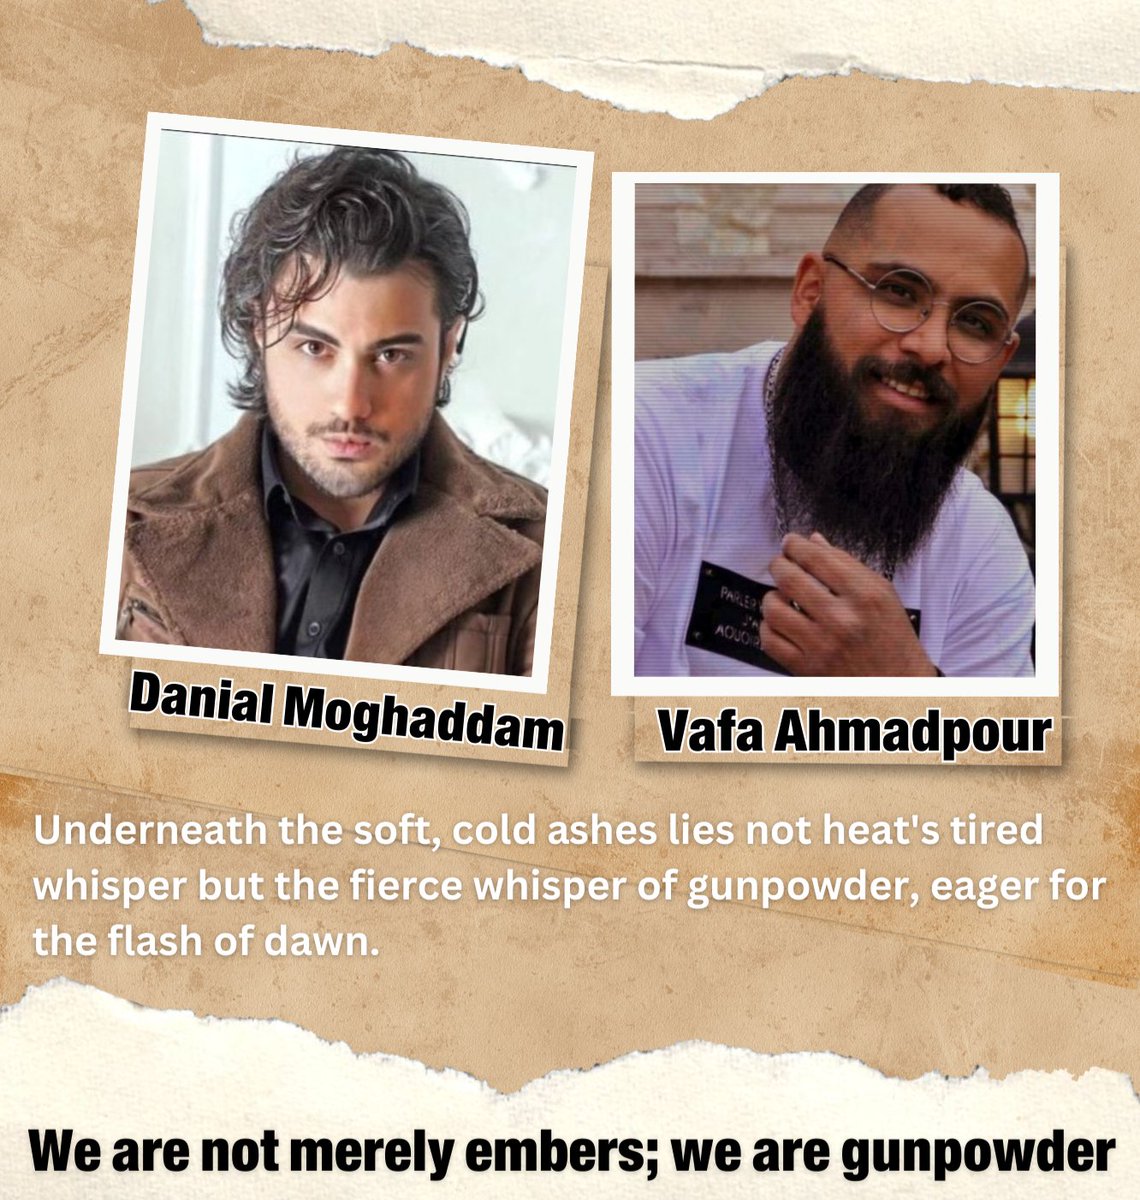 🚨 Urgent Alert: #VafaAhmadpour and #DanialMoghaddam were detained in Shiraz on May 9, 2024, for their brave video denouncing #IRGCterrorists. Their current location is unknown, and they face grave risks. Speak out now to protect their lives! @amnesty @EU_Commission @hrw